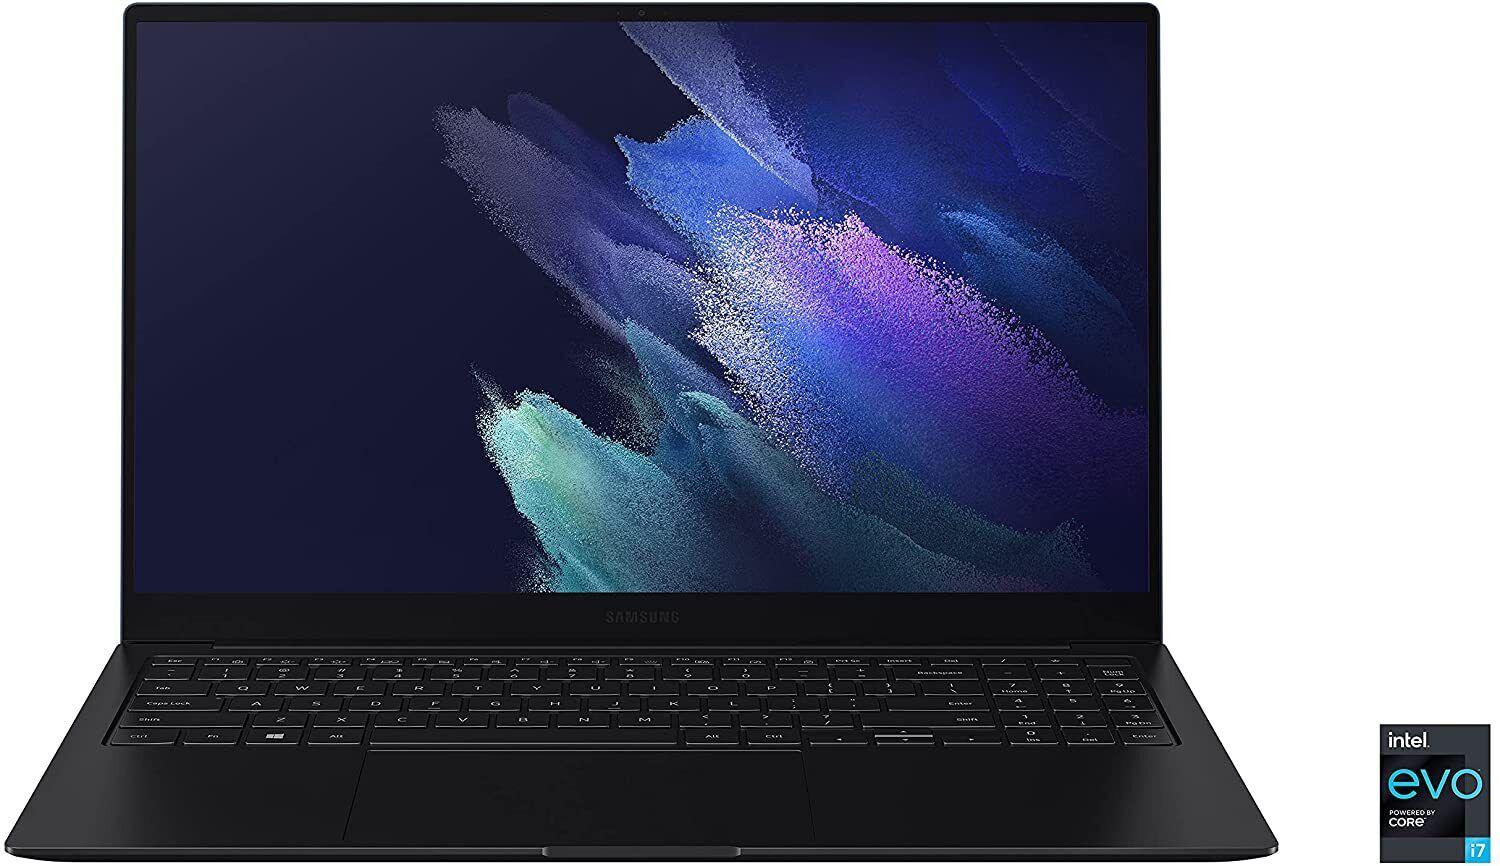 Samsung Galaxy Book Pro 15.6in i7 16GB 1TB Notebook Laptop for $589.99 Shipped